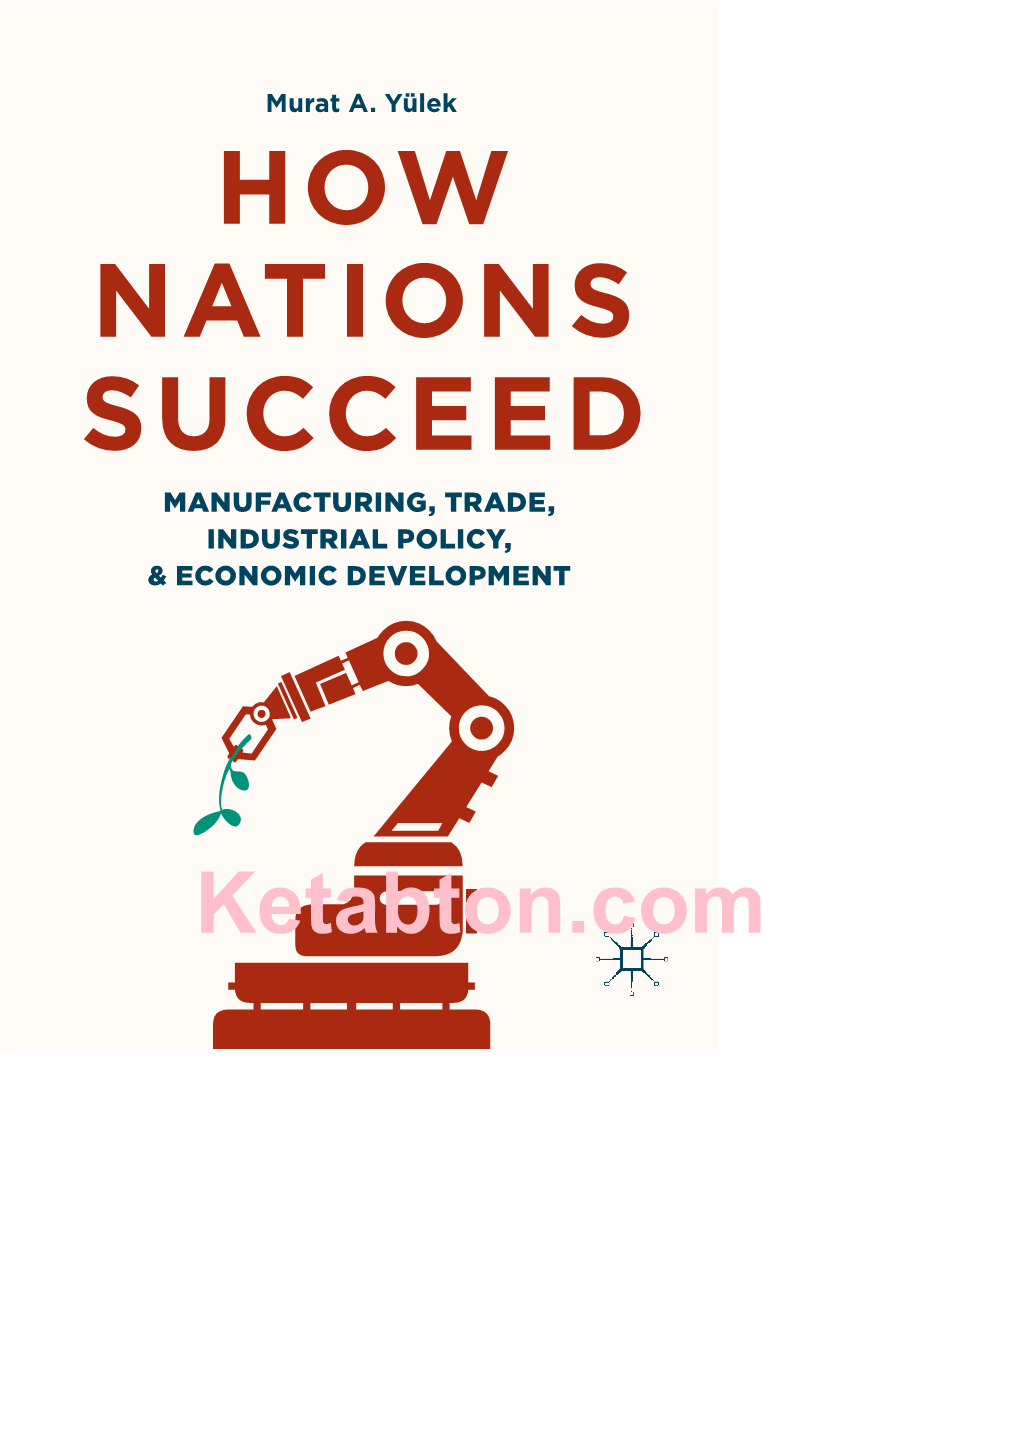 How Nations Succeed Manufacturing, Trade, Industrial Policy, & Economic Development